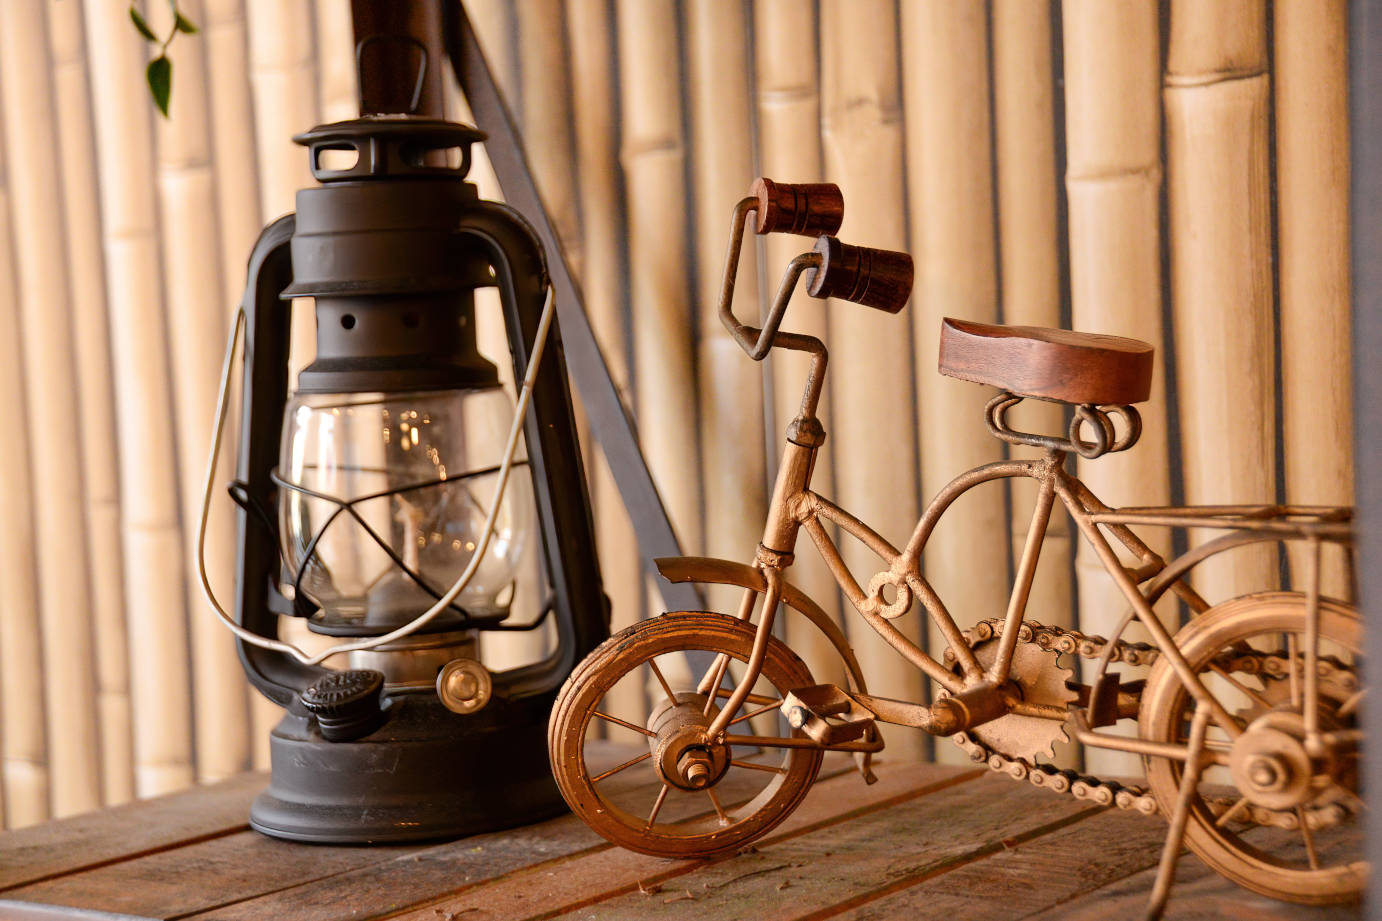 Wooden toy bike and oil lamp on table